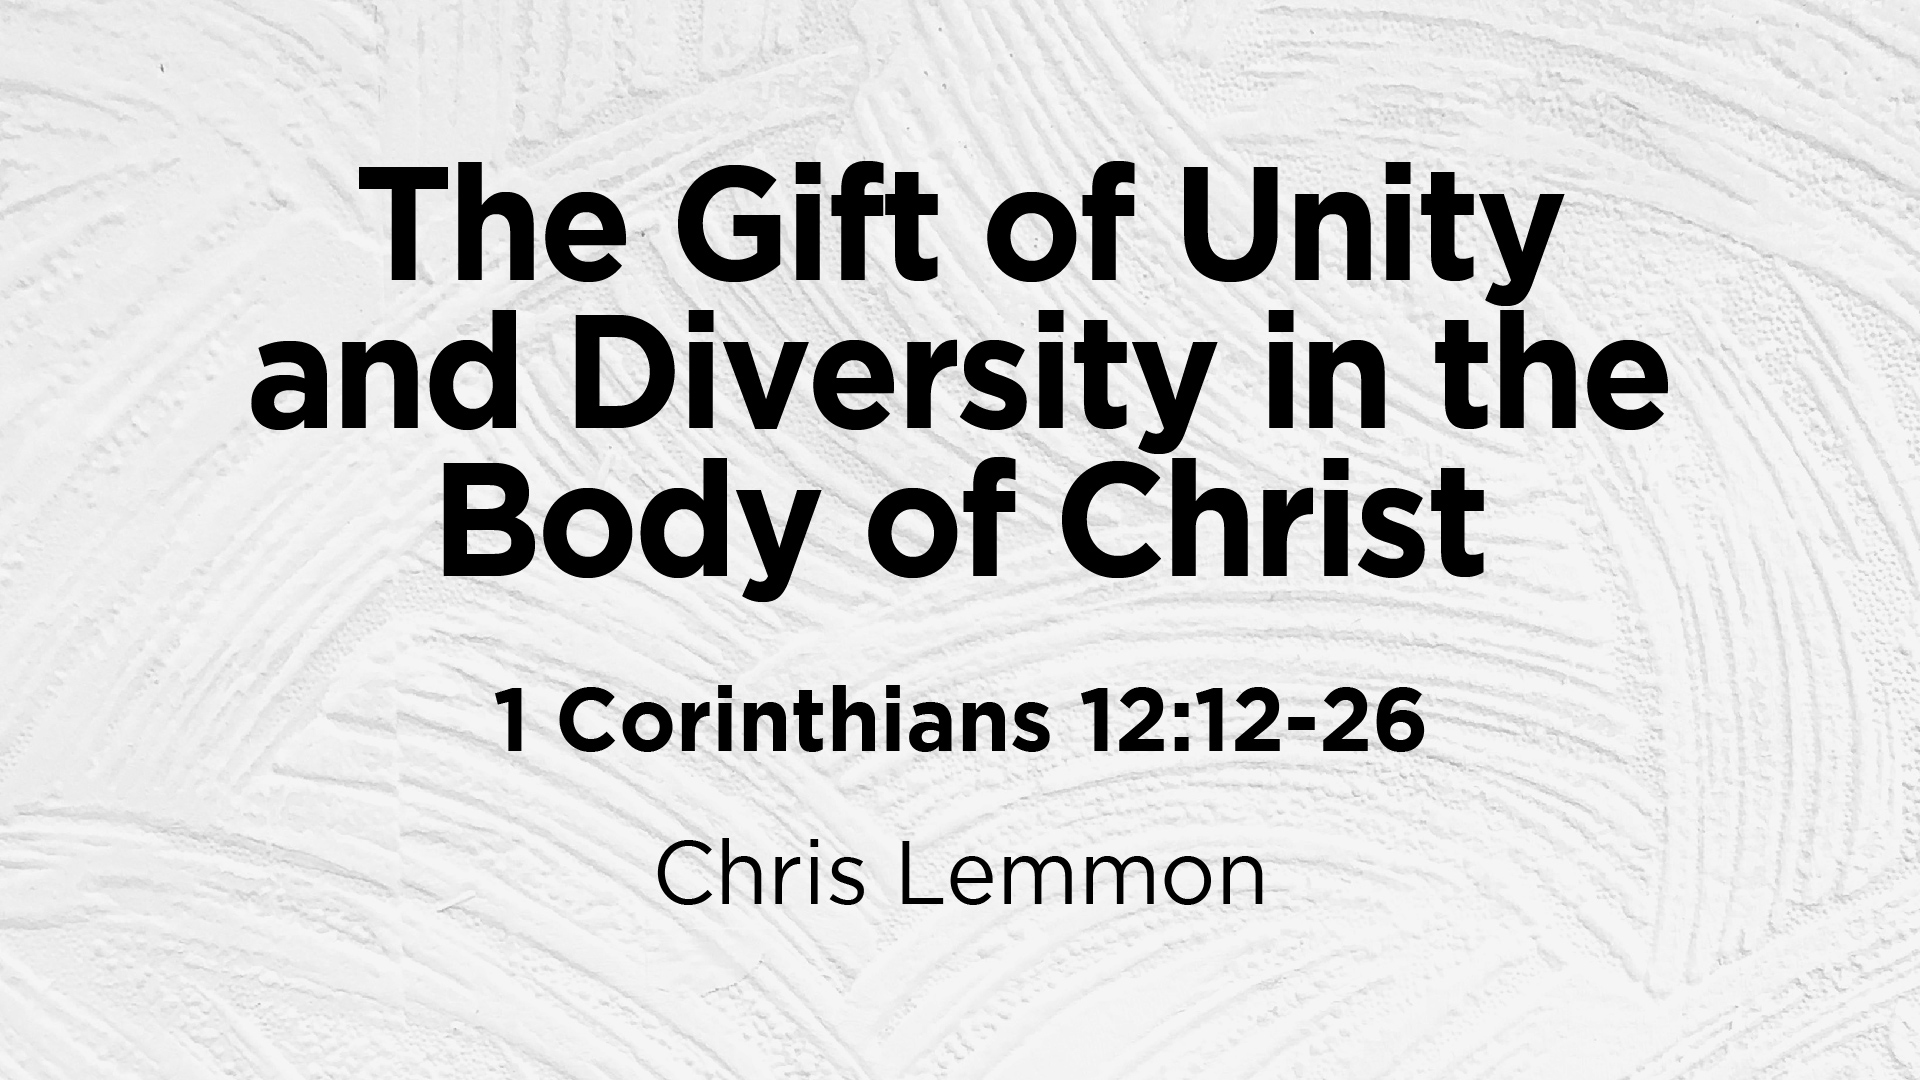 The Gift of Unity and Diversity in the Body of Christ